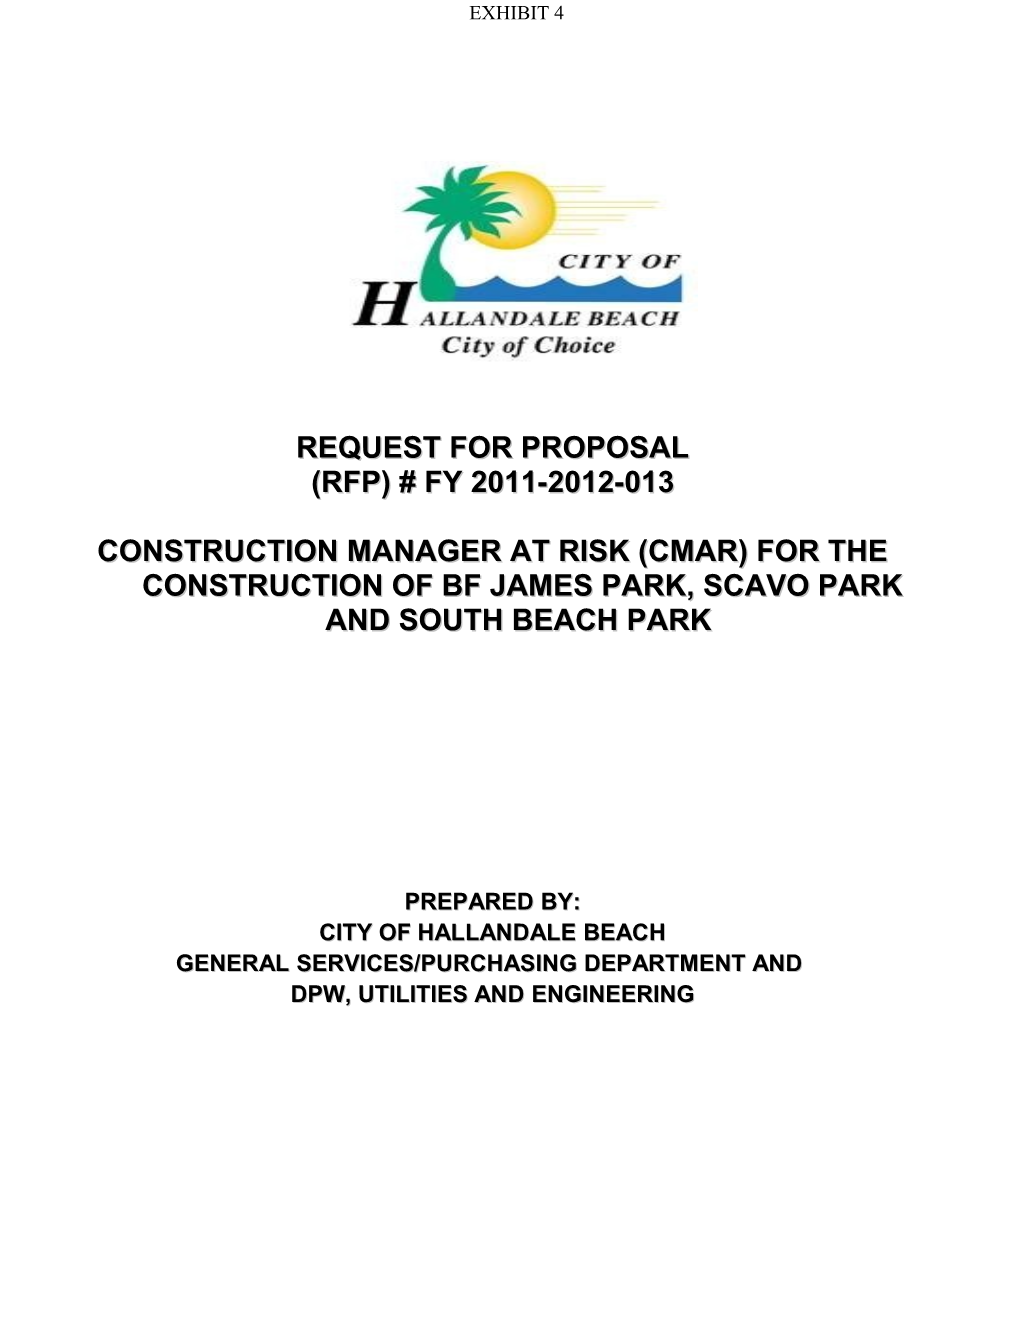 LEGAL NOTICE Is Hereby Given That the CITY of HALLANDALE BEACH on BEHALF of the THREE ISLANDS